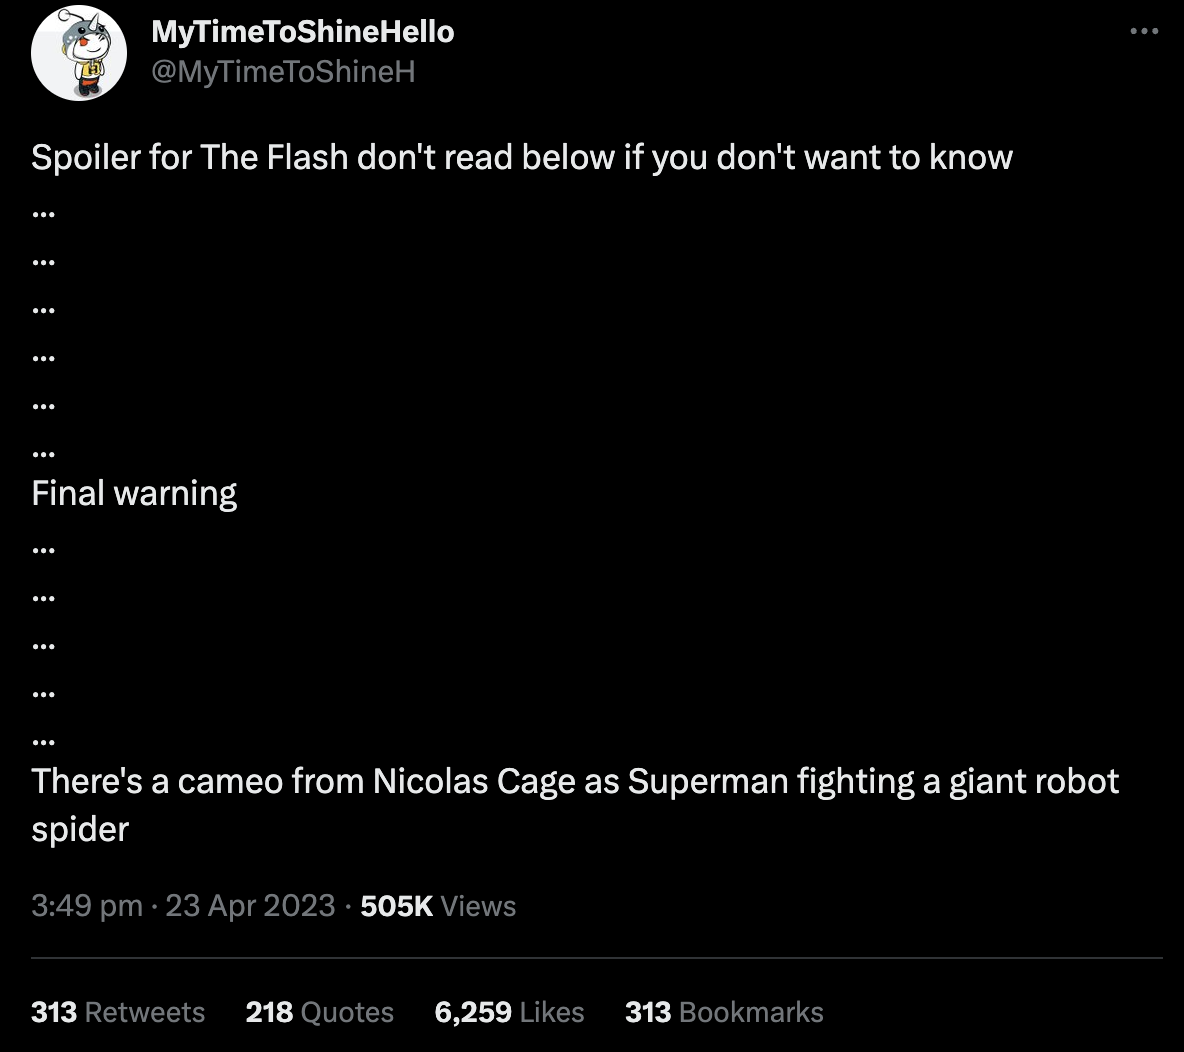 Scooper MyTimeToShine claims Nicolas Cage cameo in The Flash sees him fighting a giant spider